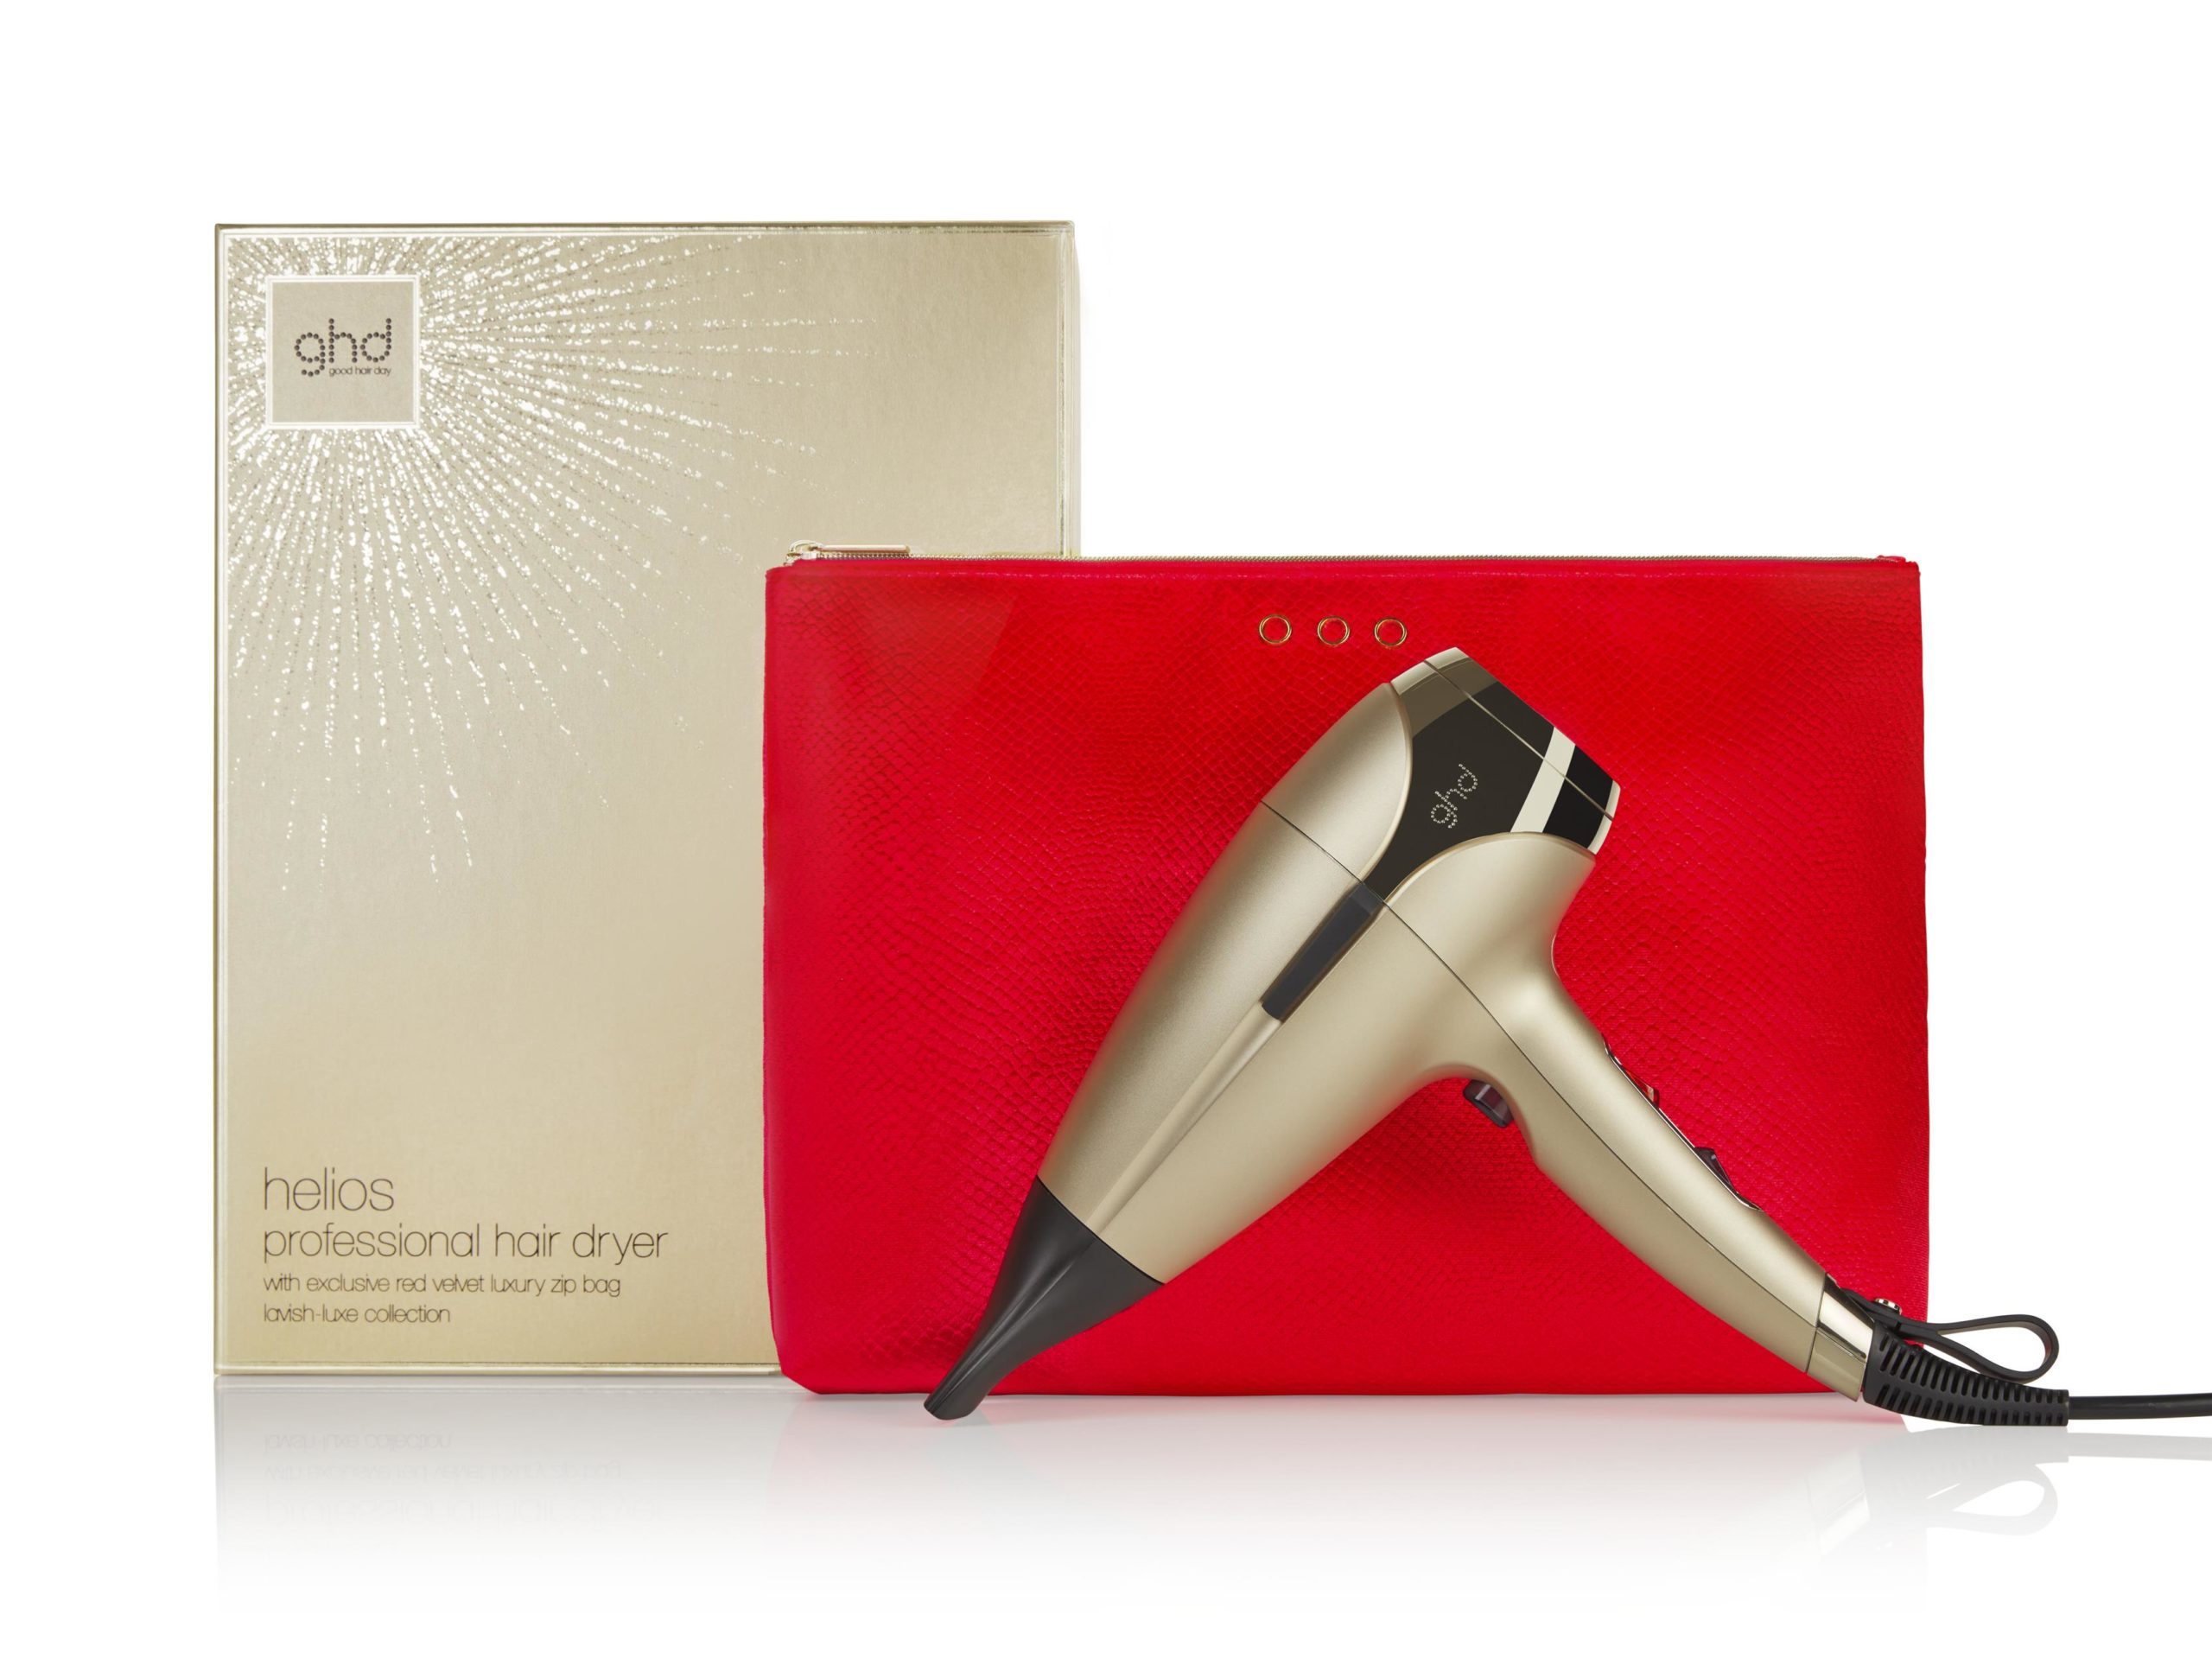 ghd Gift Set 'Grand Luxe' Champagne Gold Helios Hair Dryer